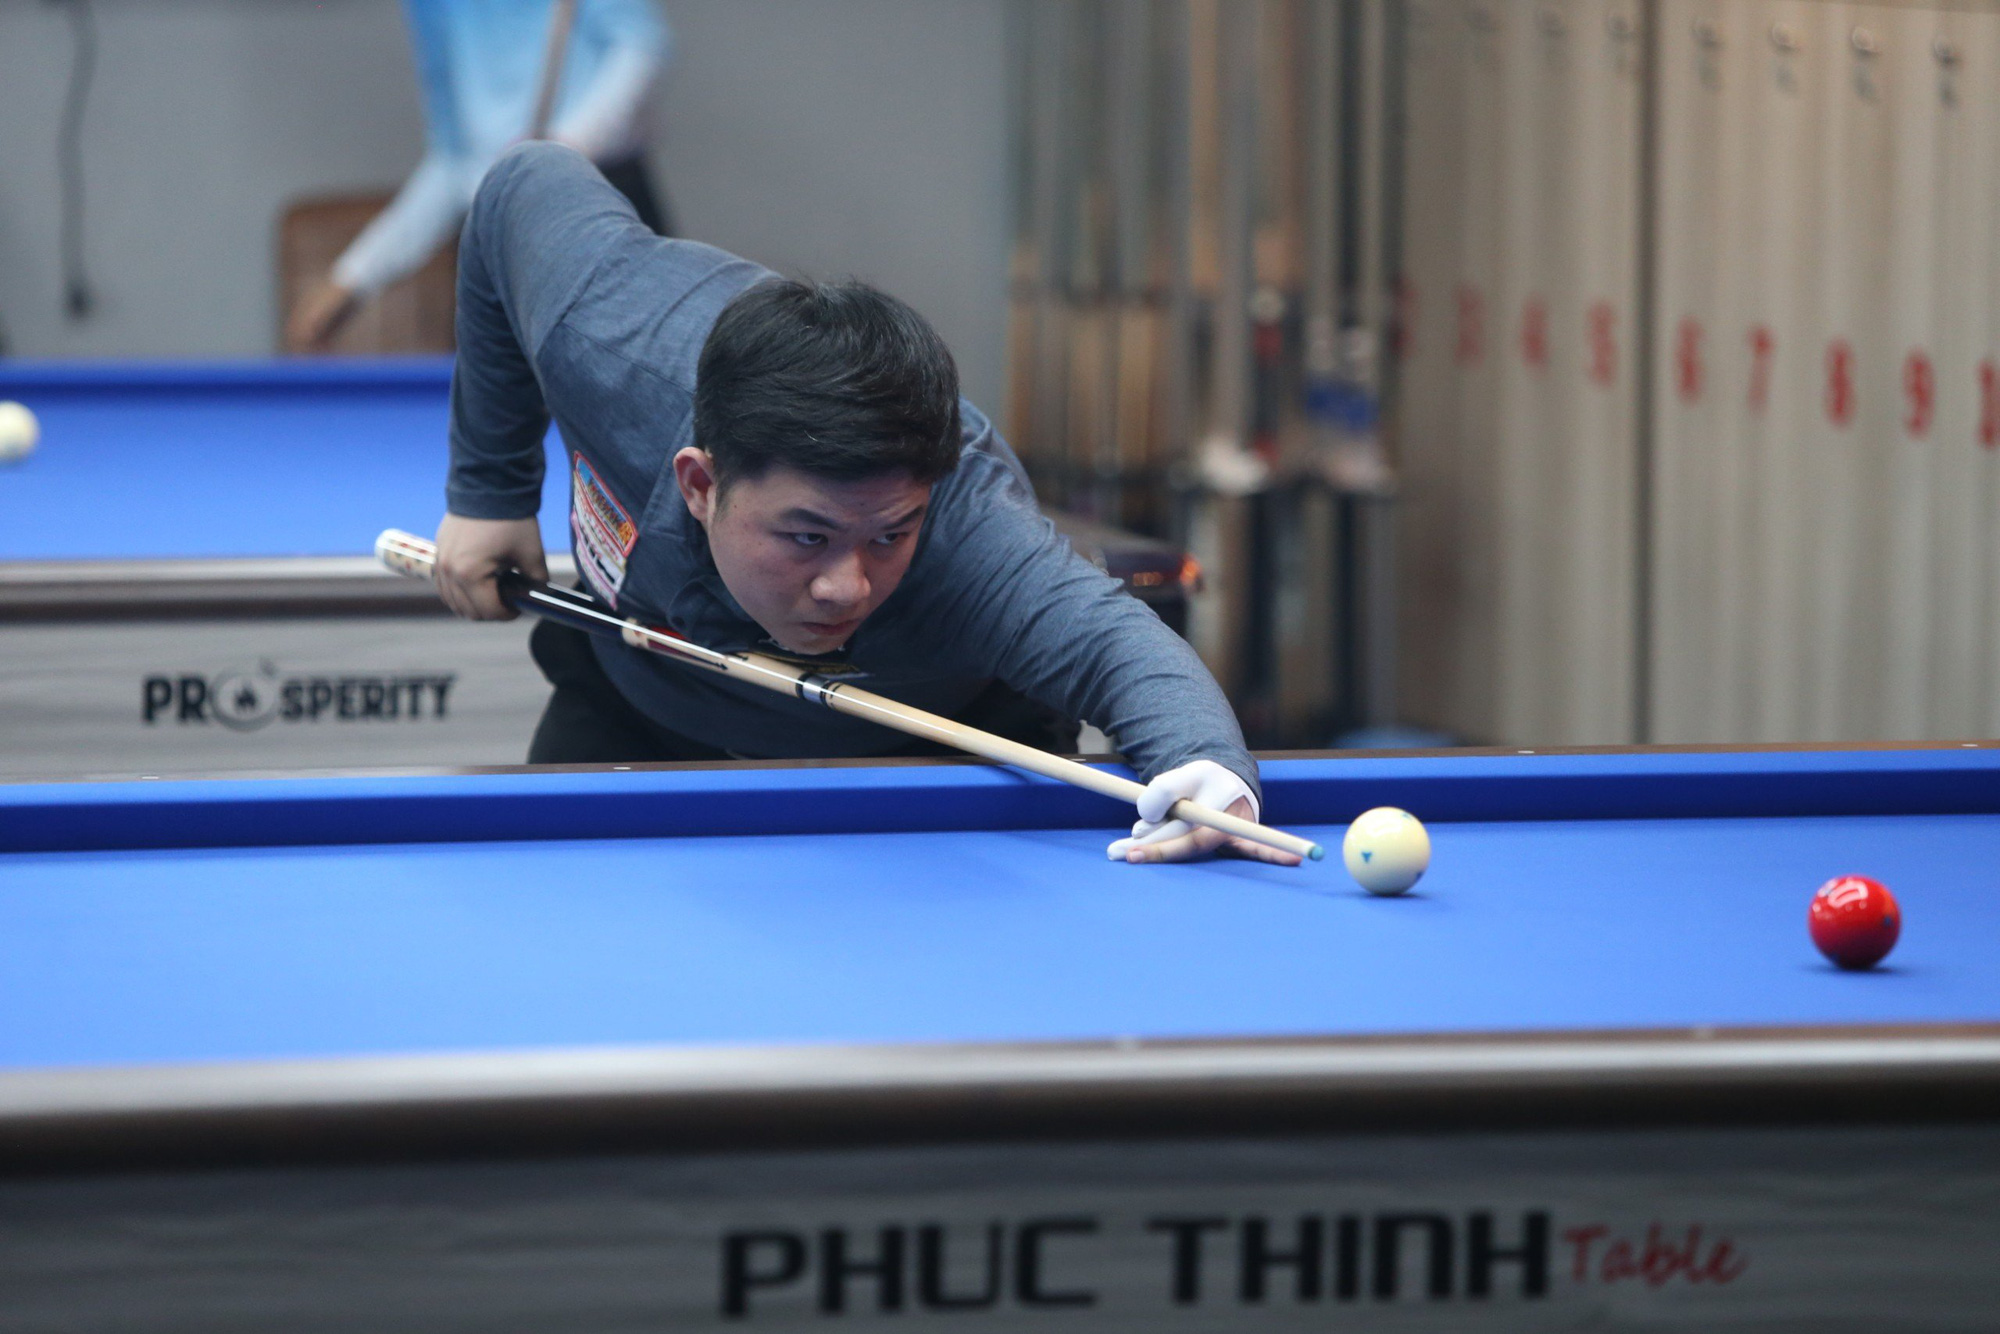 Bao Phuong Vinh is showing high performance at the tournament - Photo: PL